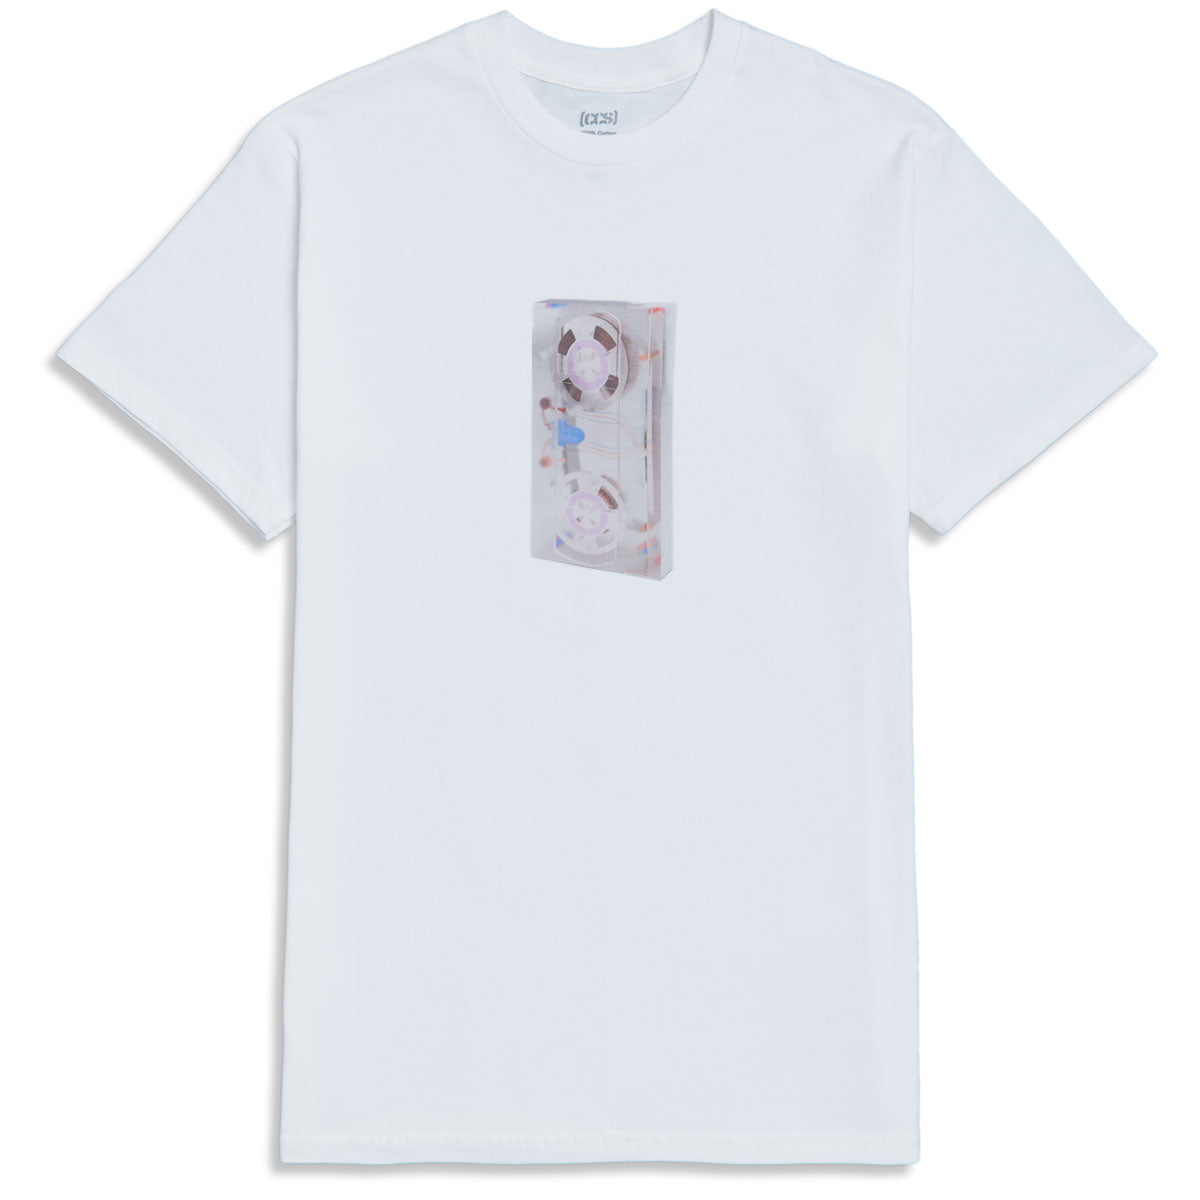 CCS Going Clear VHS T-Shirt - White image 1